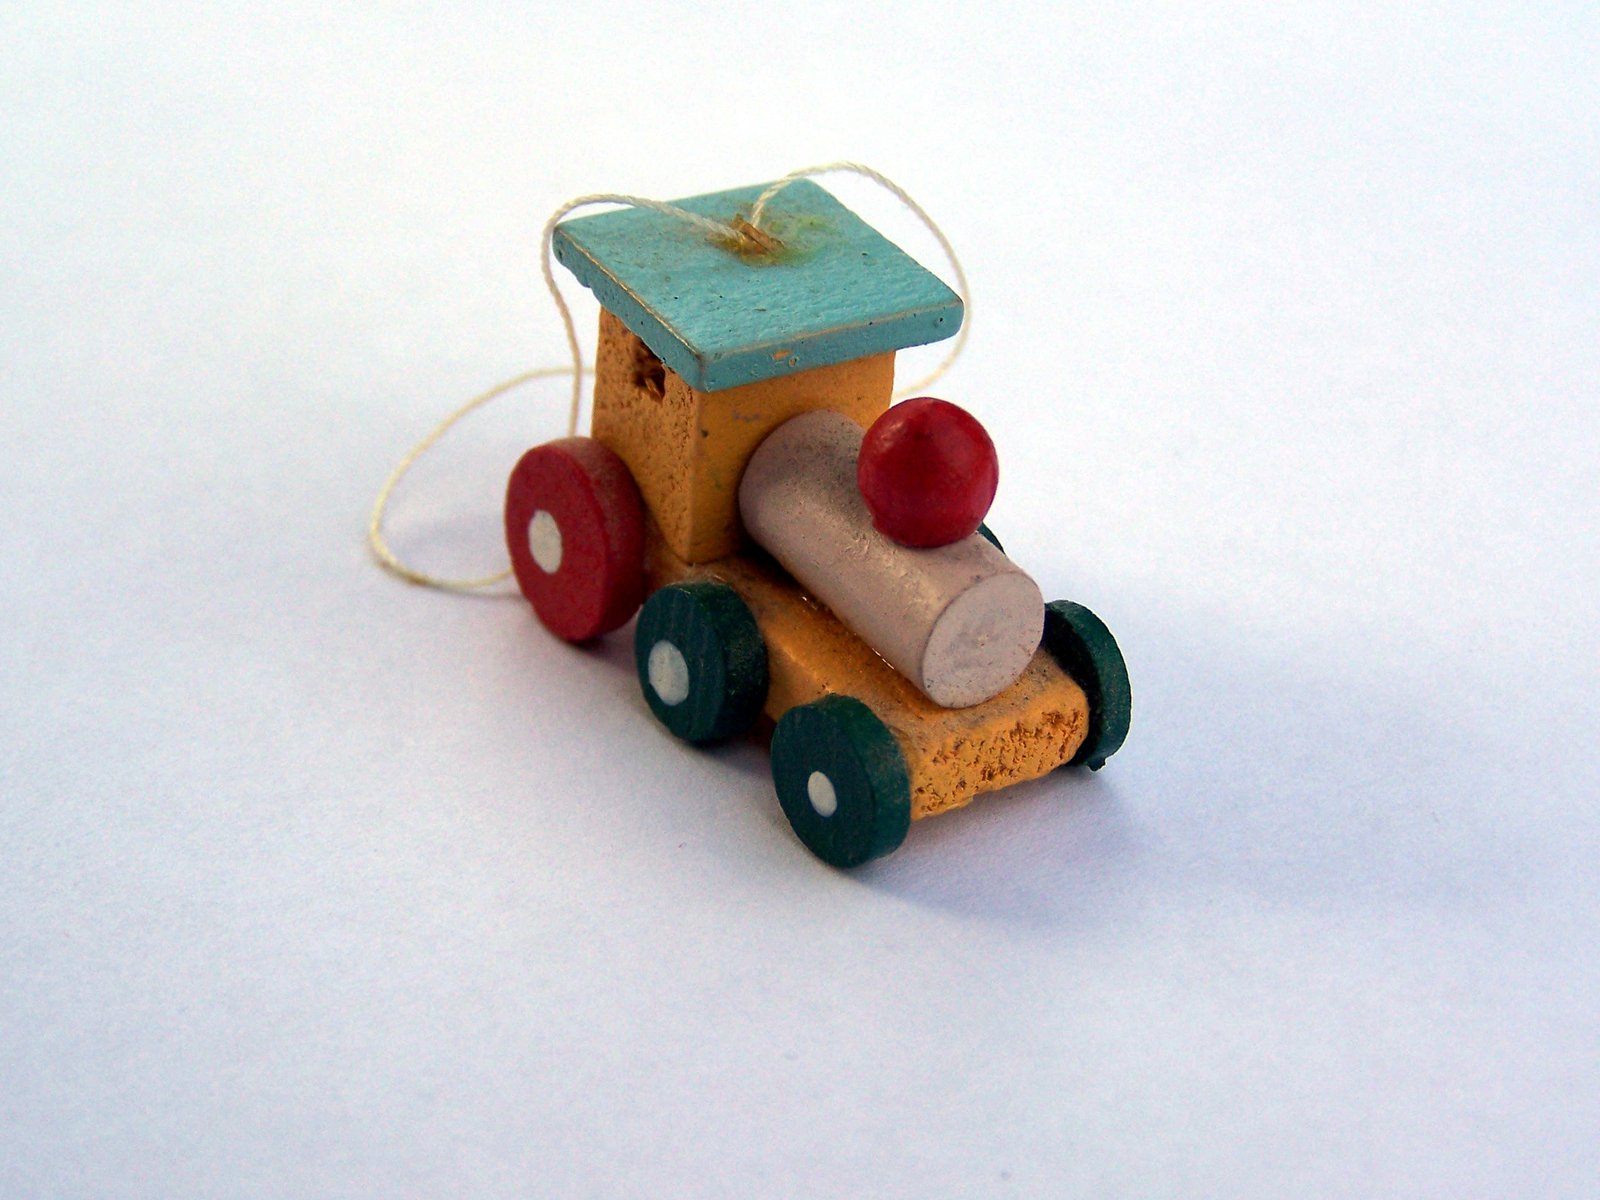 a wooden toy car with red s sits on a white background